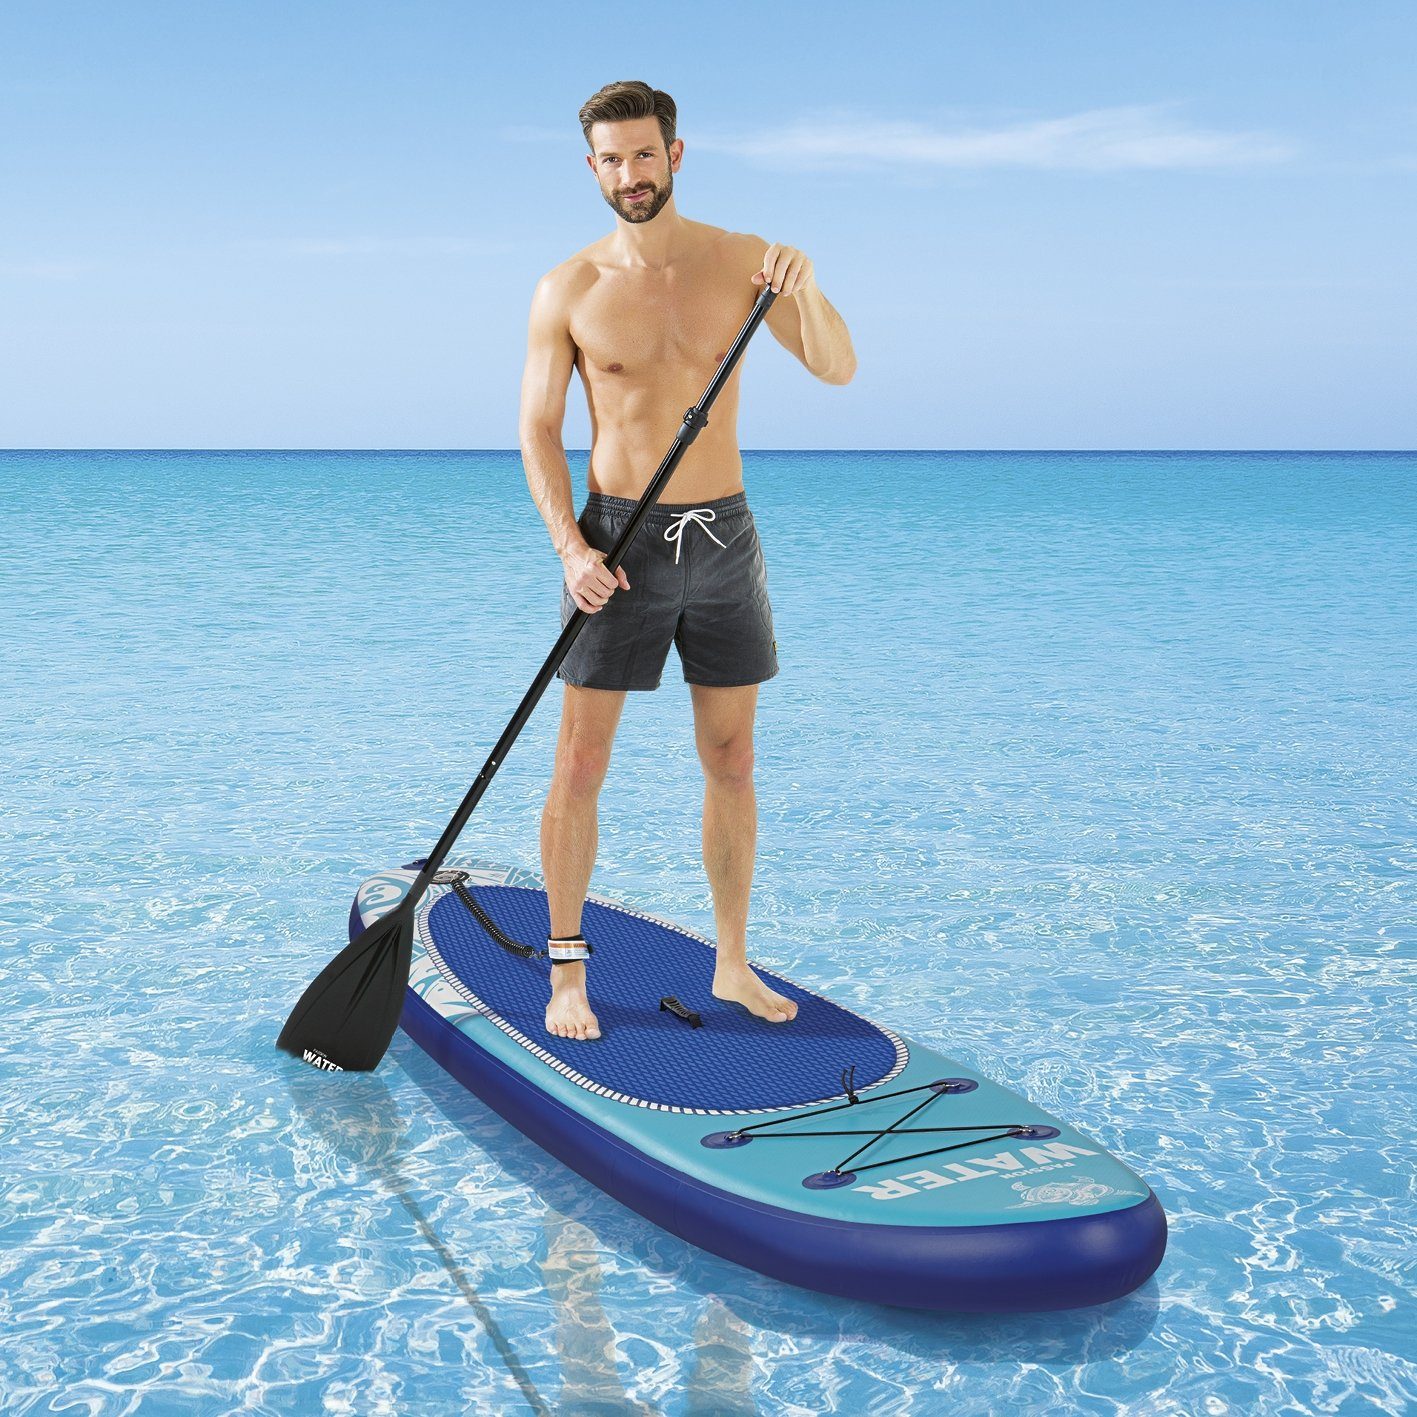 Stand Inflatable 110kg, SUP inkl. cm, Komplett Paddel Set Board SUP-Board, Stand-Up 300 MAXXMEE up Paddling Paddle-Board blau/türkis Board Paddle